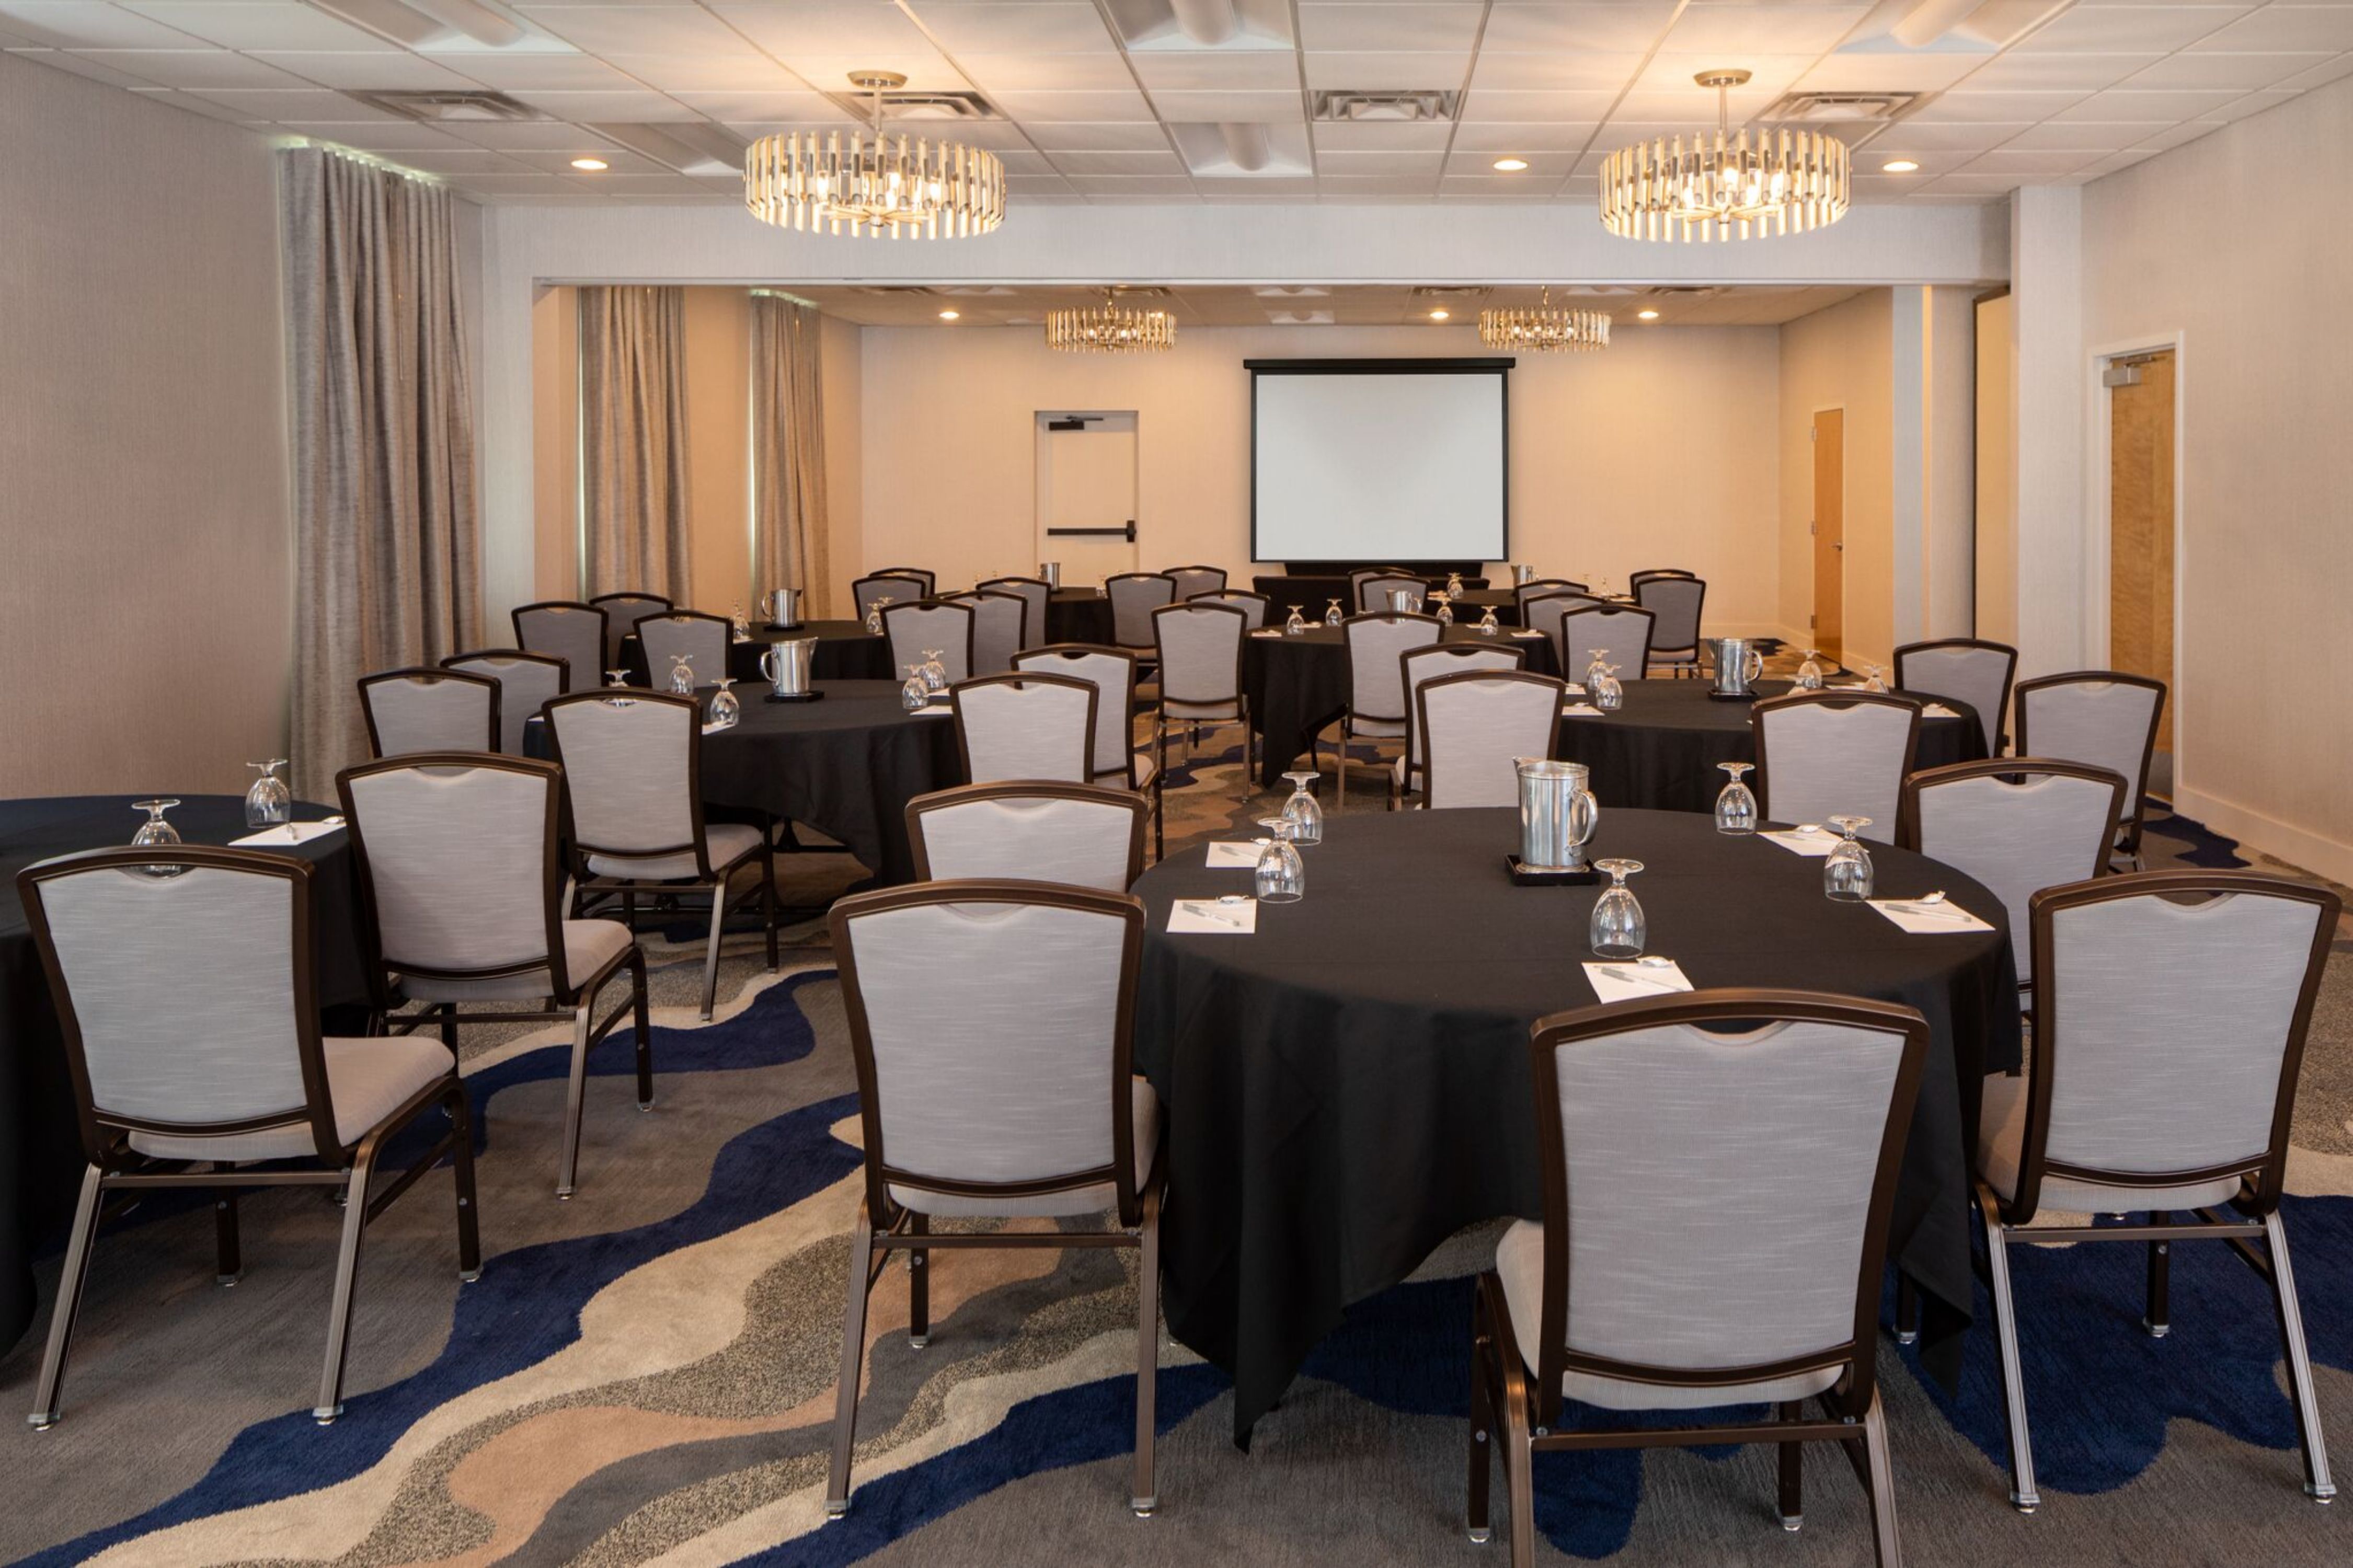 Meeting Room Setup with Round Tables